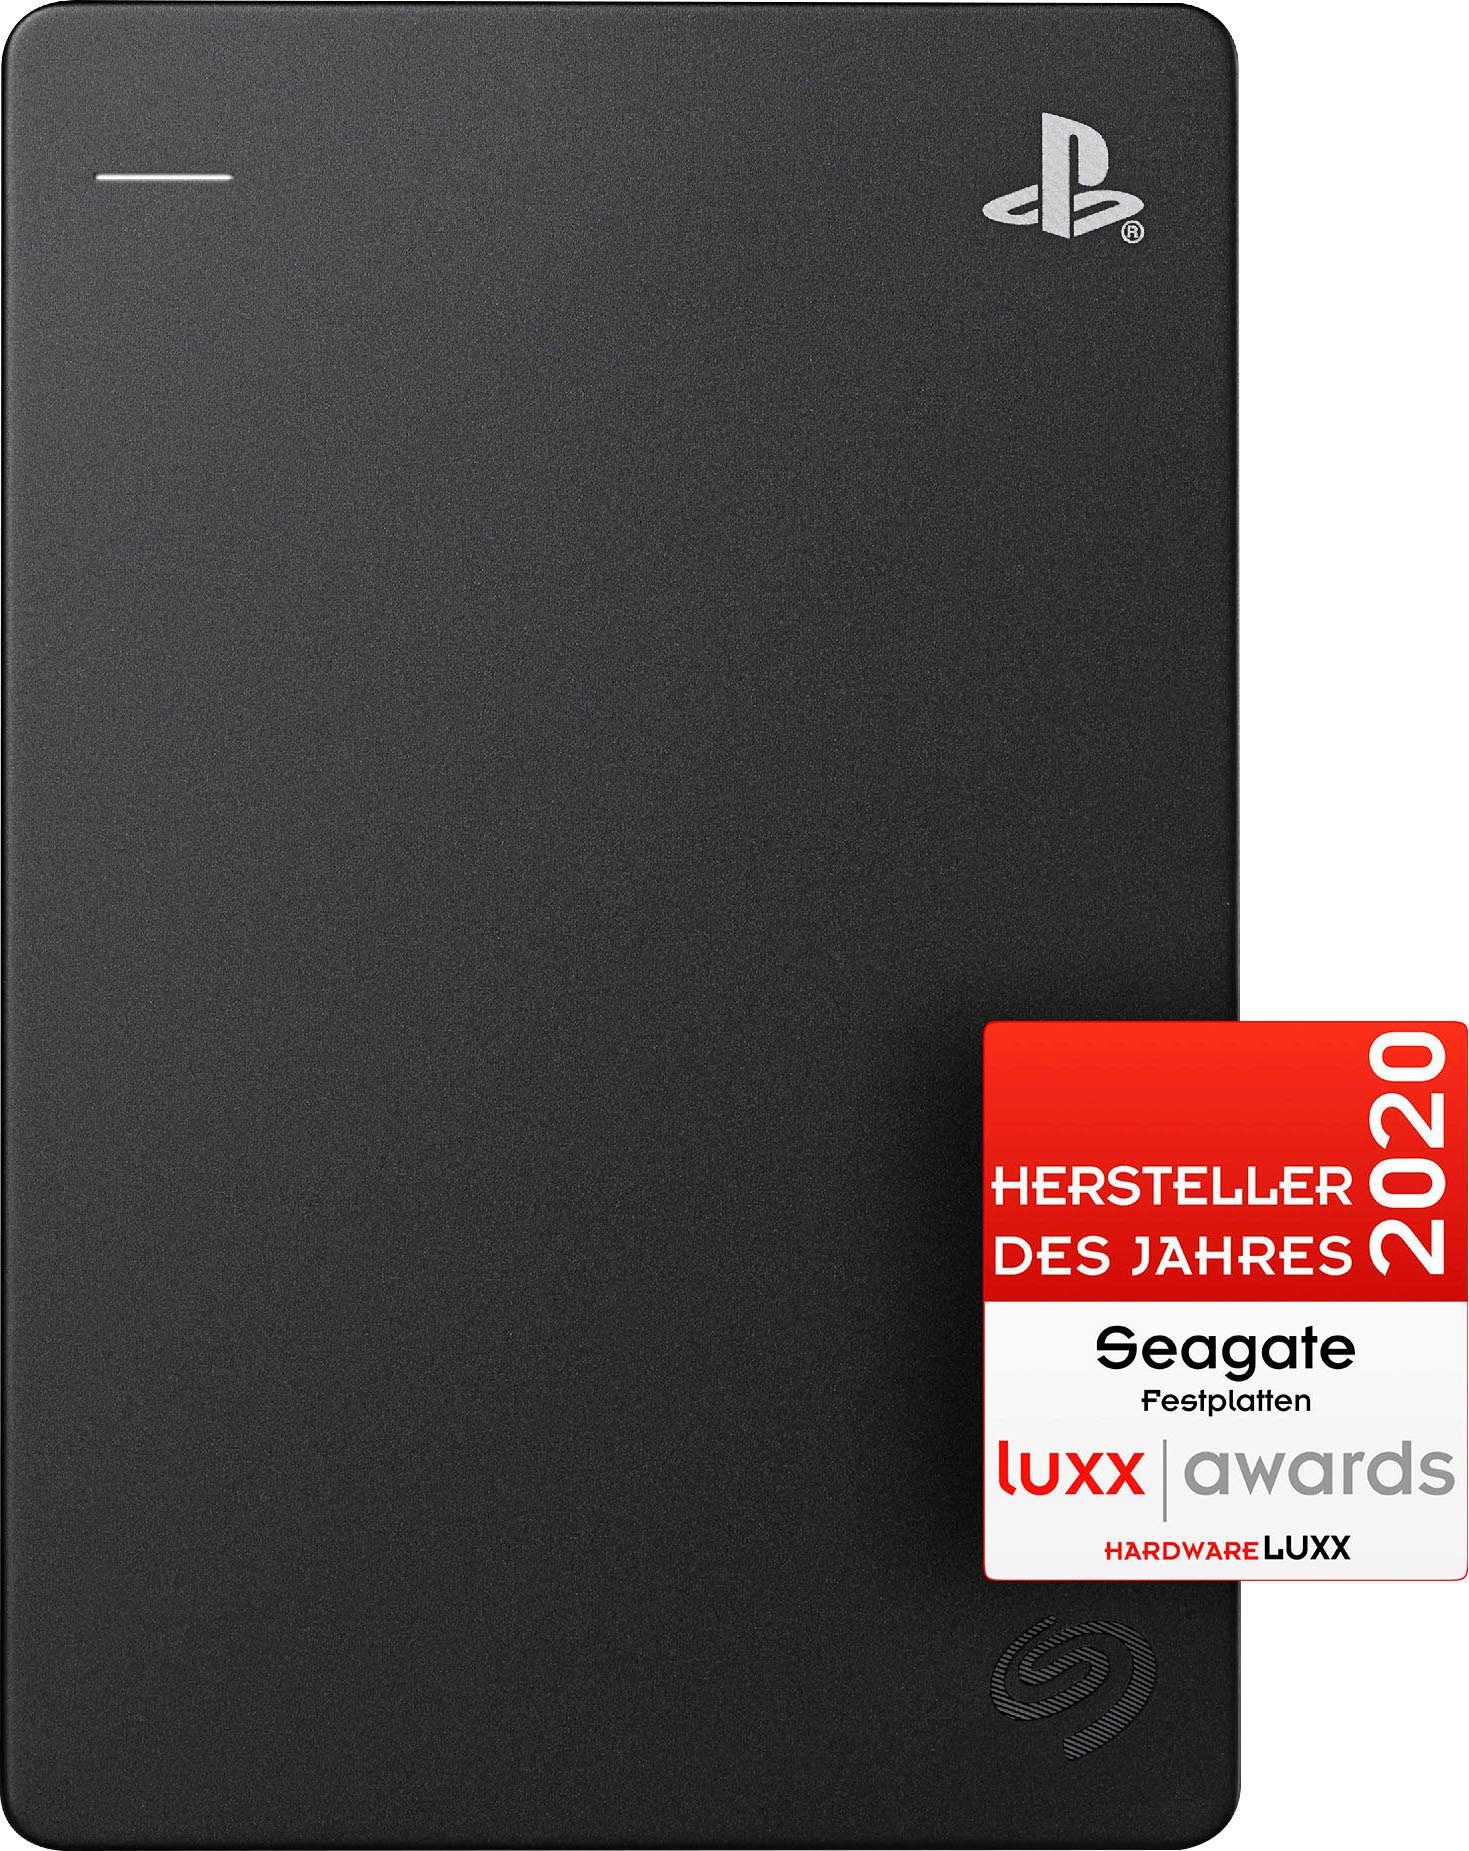 Niedlich! Seagate Game PS4 (2 STGD2000200 Drive externe TB) 2,5" Gaming-Festplatte